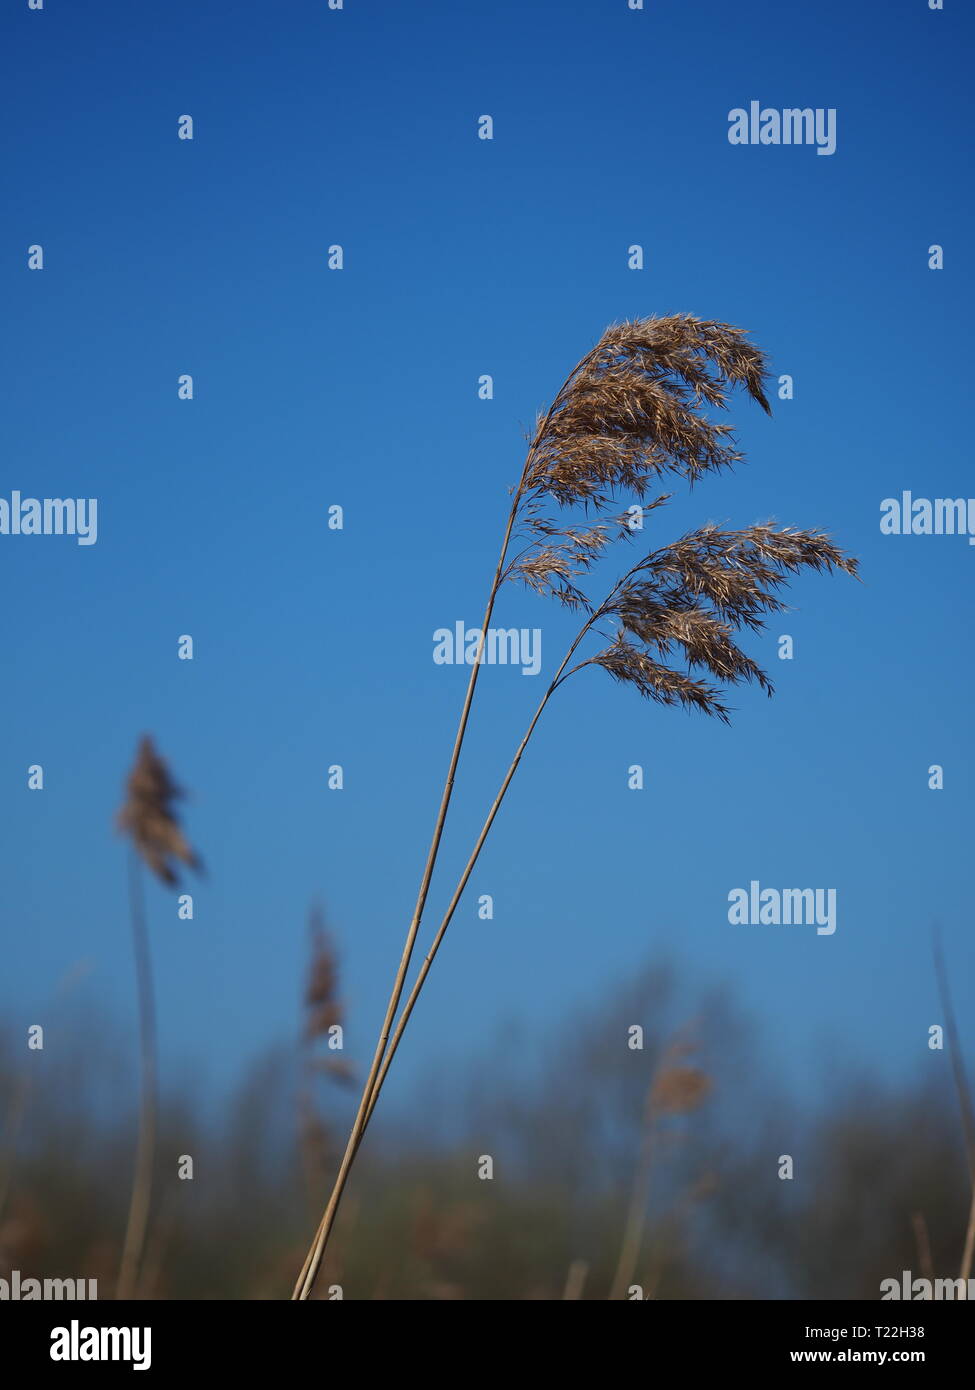 Closeup of two reed seed heads blowing in a gentle breeze against a clear blue sky Stock Photo